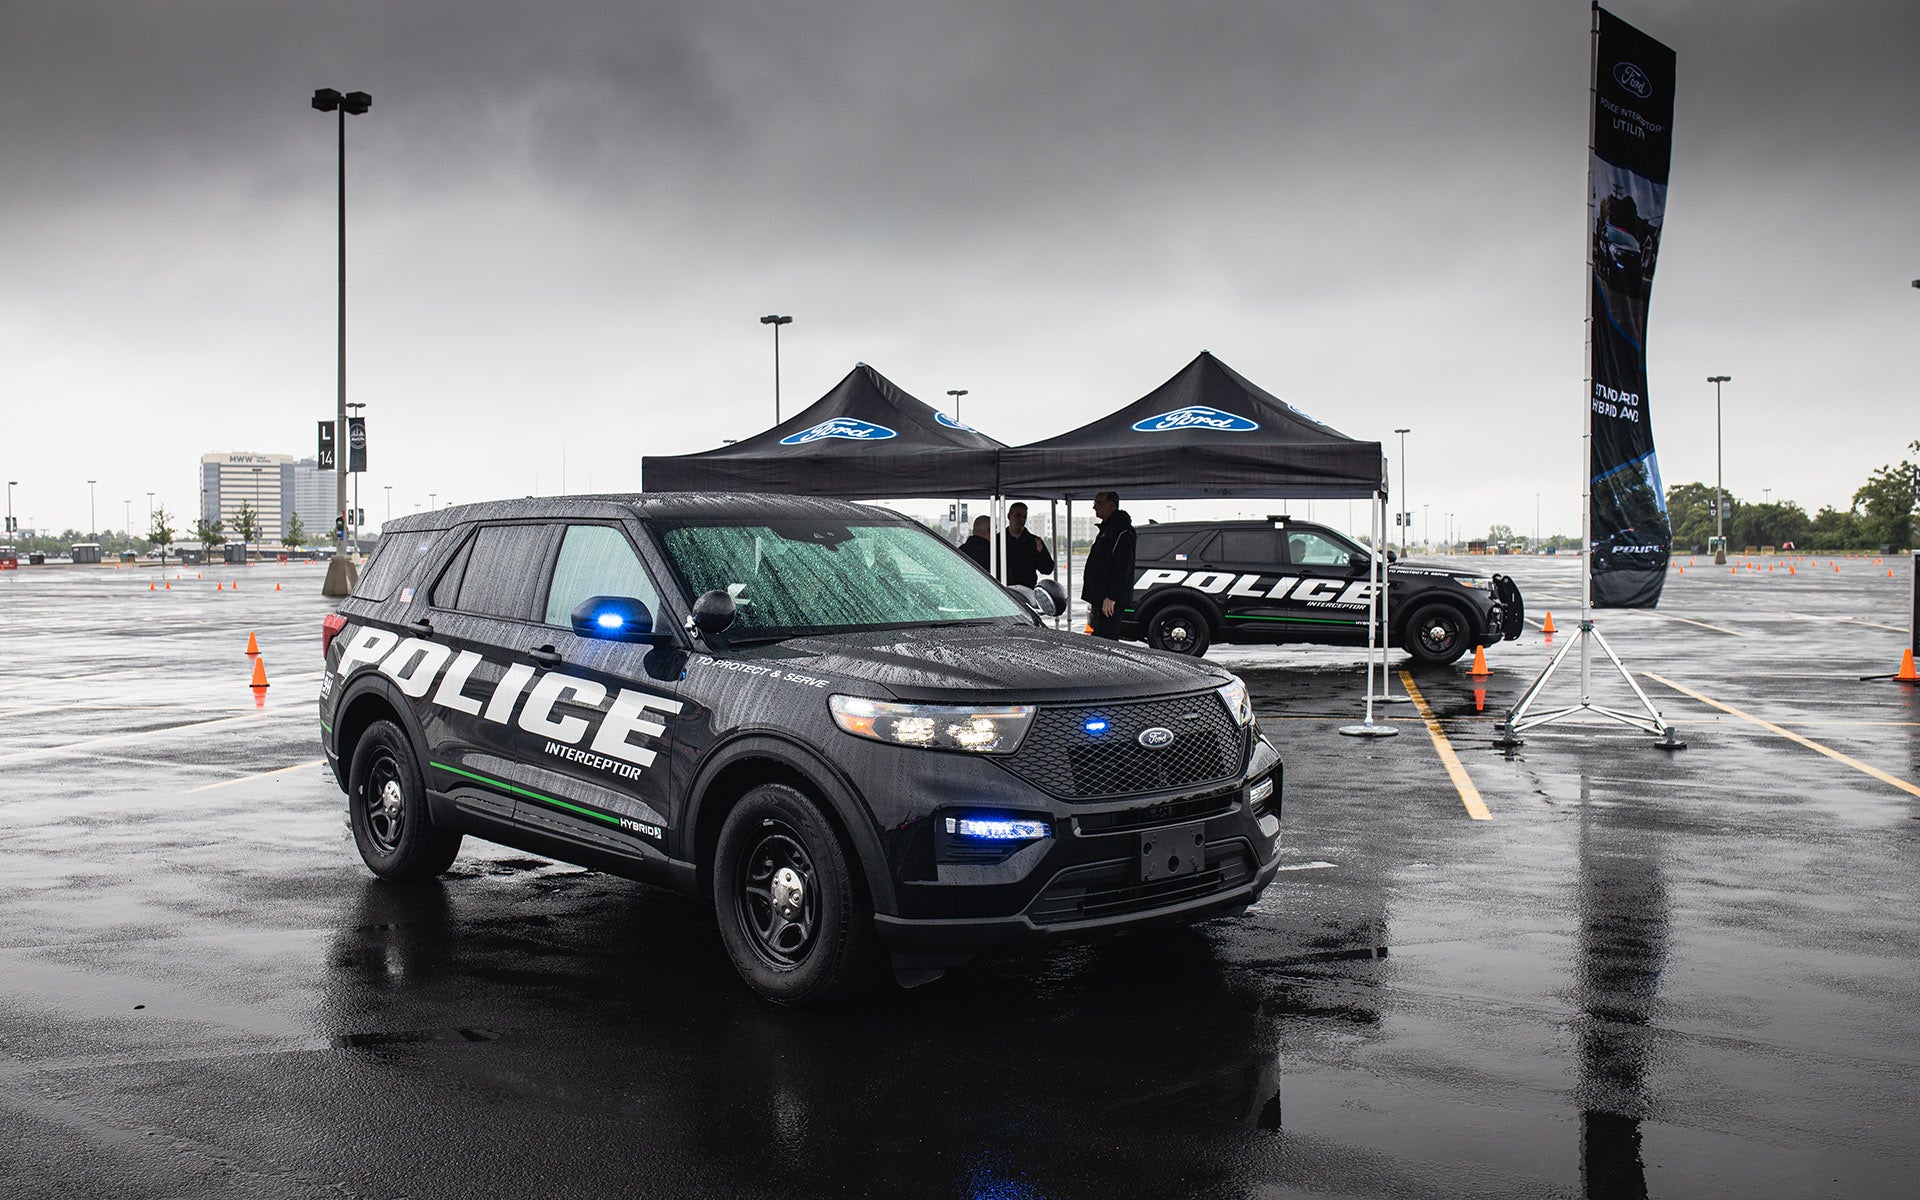 2020 Ford Explorer Police Interceptor Utility Review Coming To A Rear View Mirror Near You